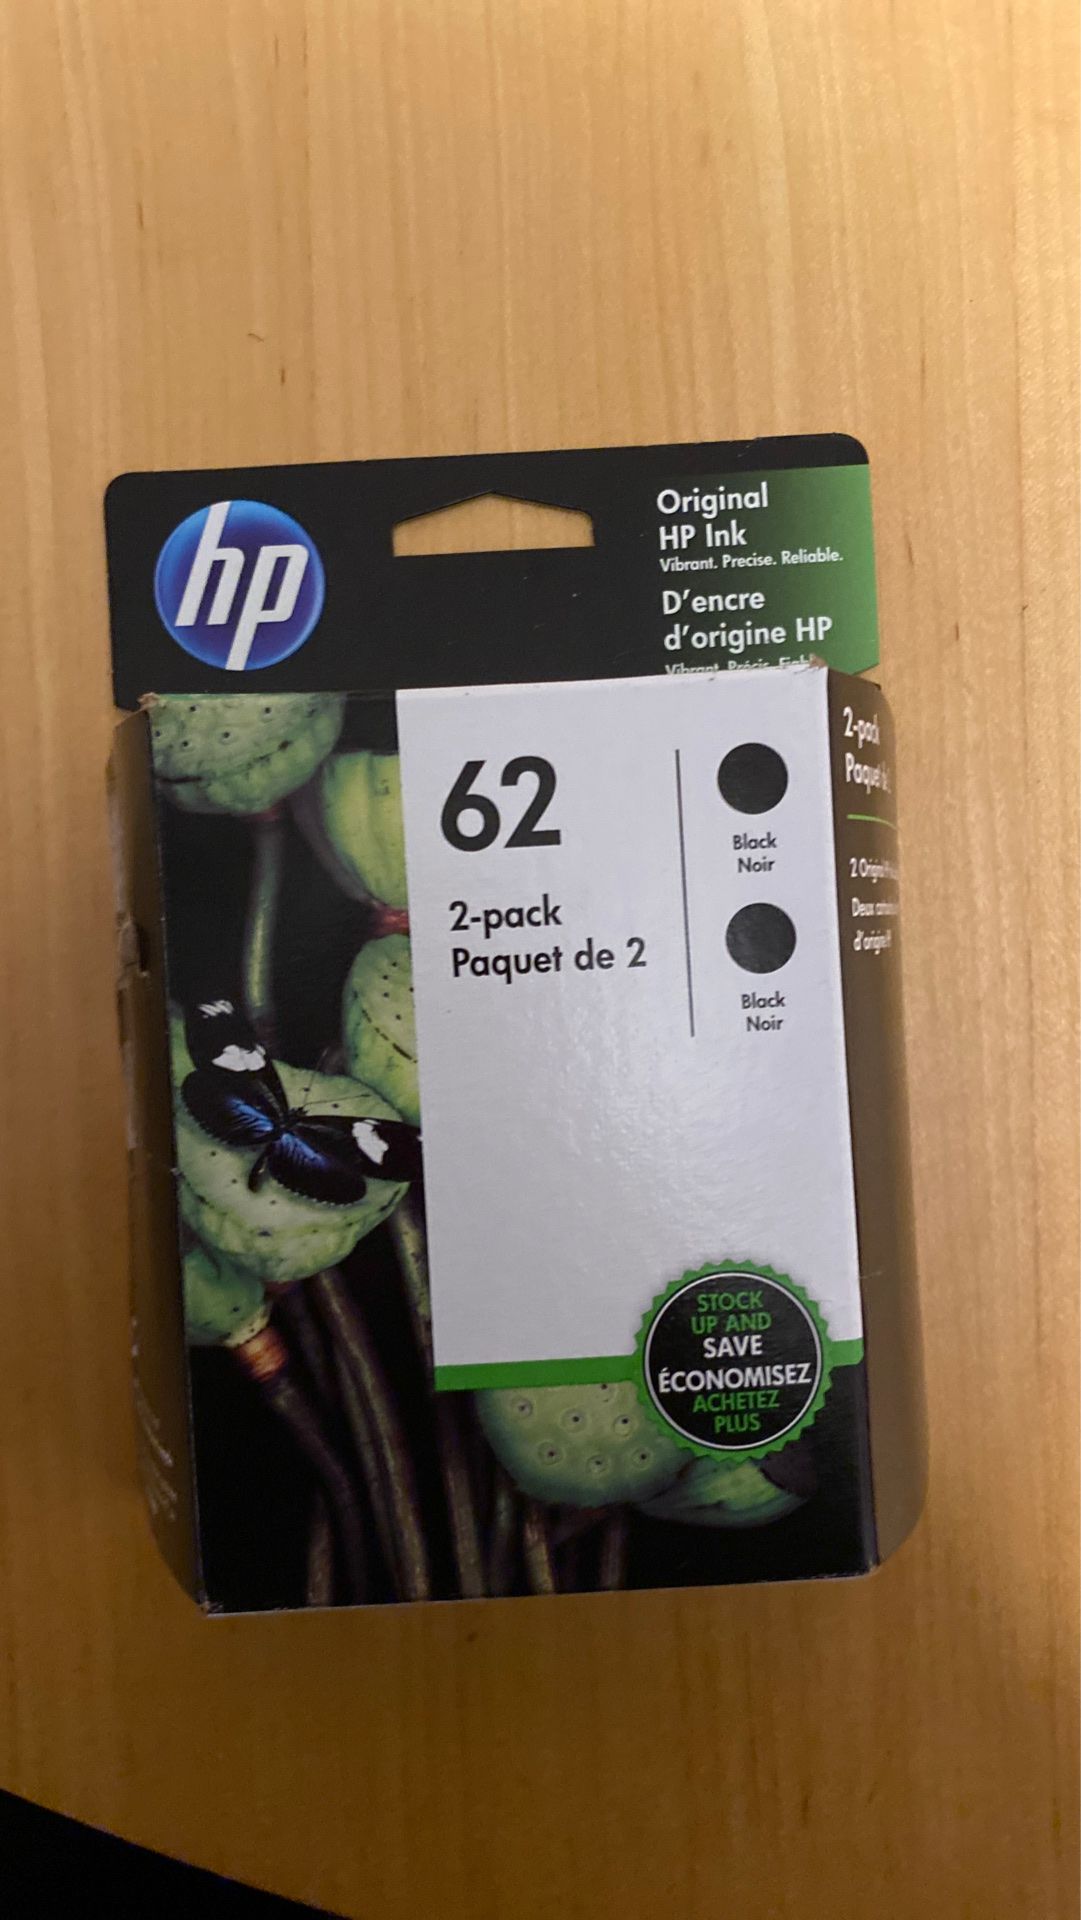 INK FOR HP PRINTER(BLACK) DOUBLE PACK